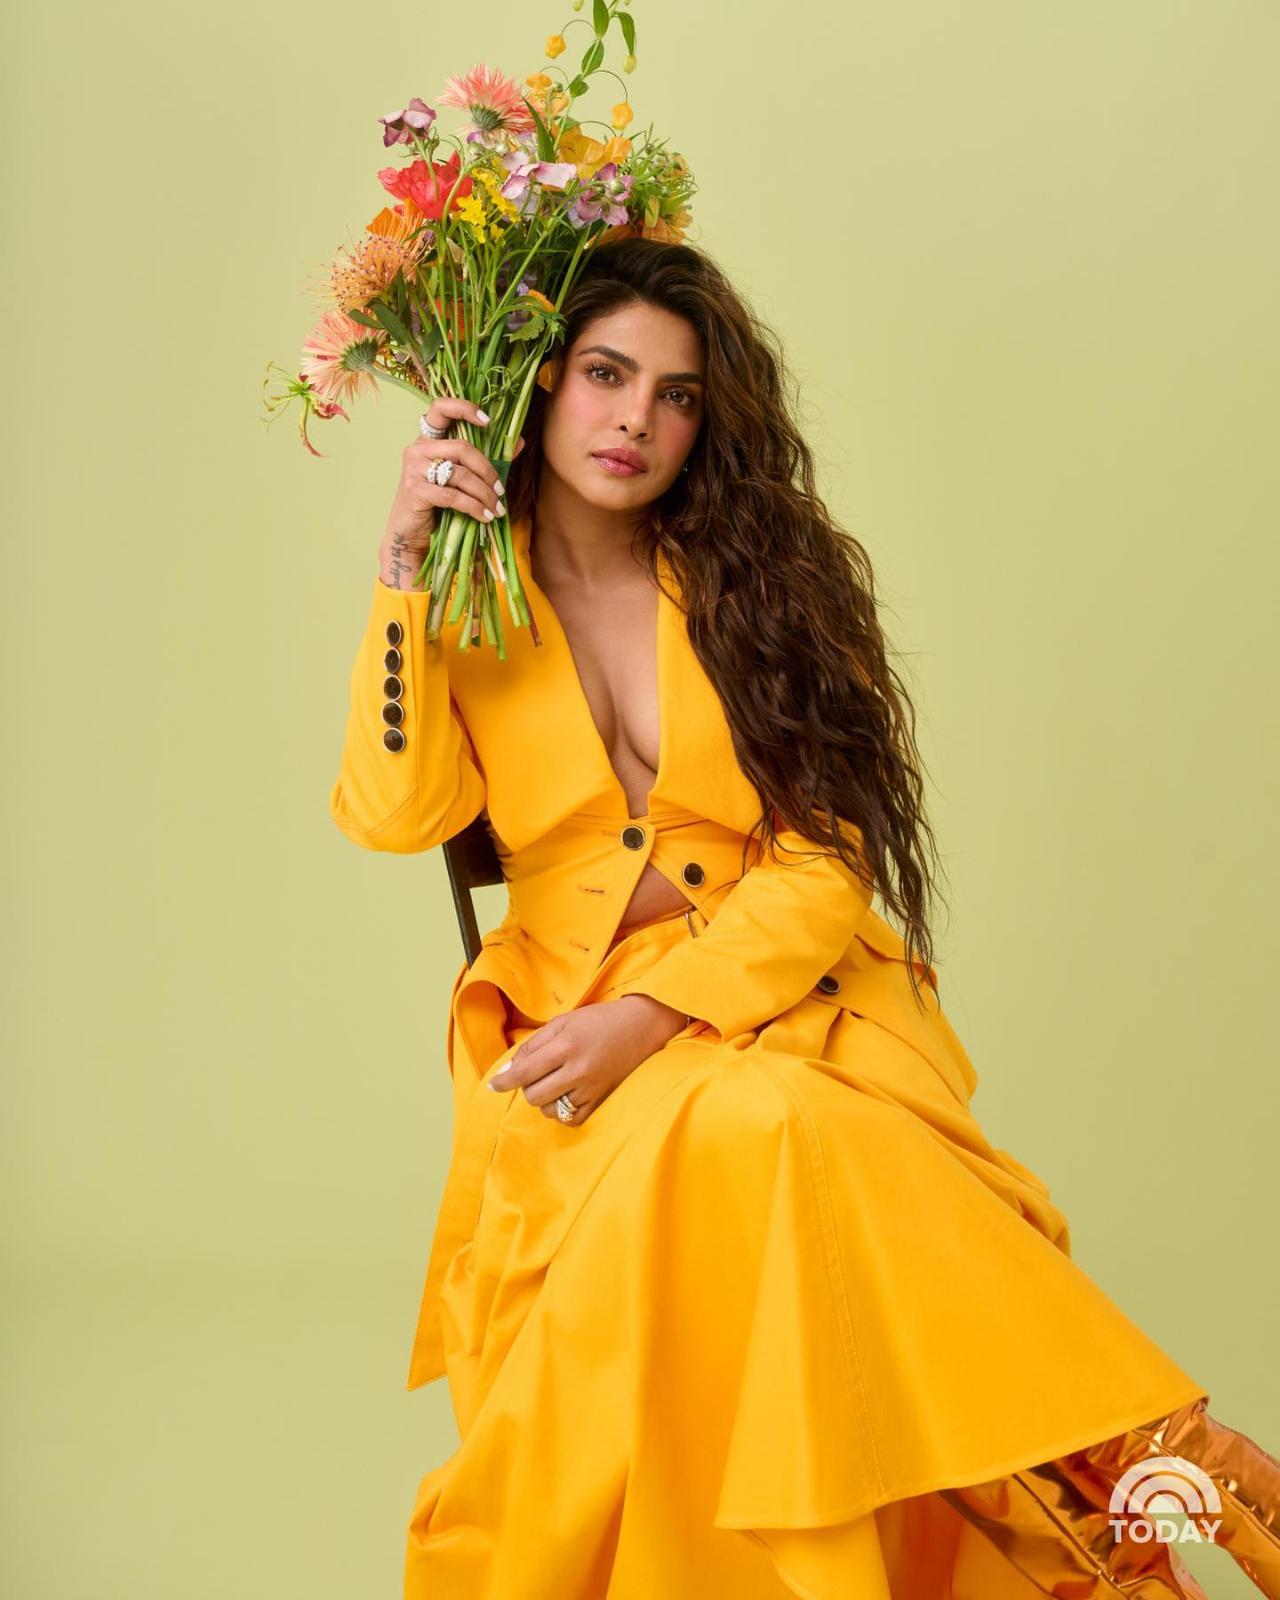 Priyanka Chopra looked stunning in a deep neck two-piece yellow dress. Priyanka Chopra, who knows how to ace the fashion game, makes a remarkable style statement with soft curls and nude makeup. With only a few rings, the actress kept her accessories simple